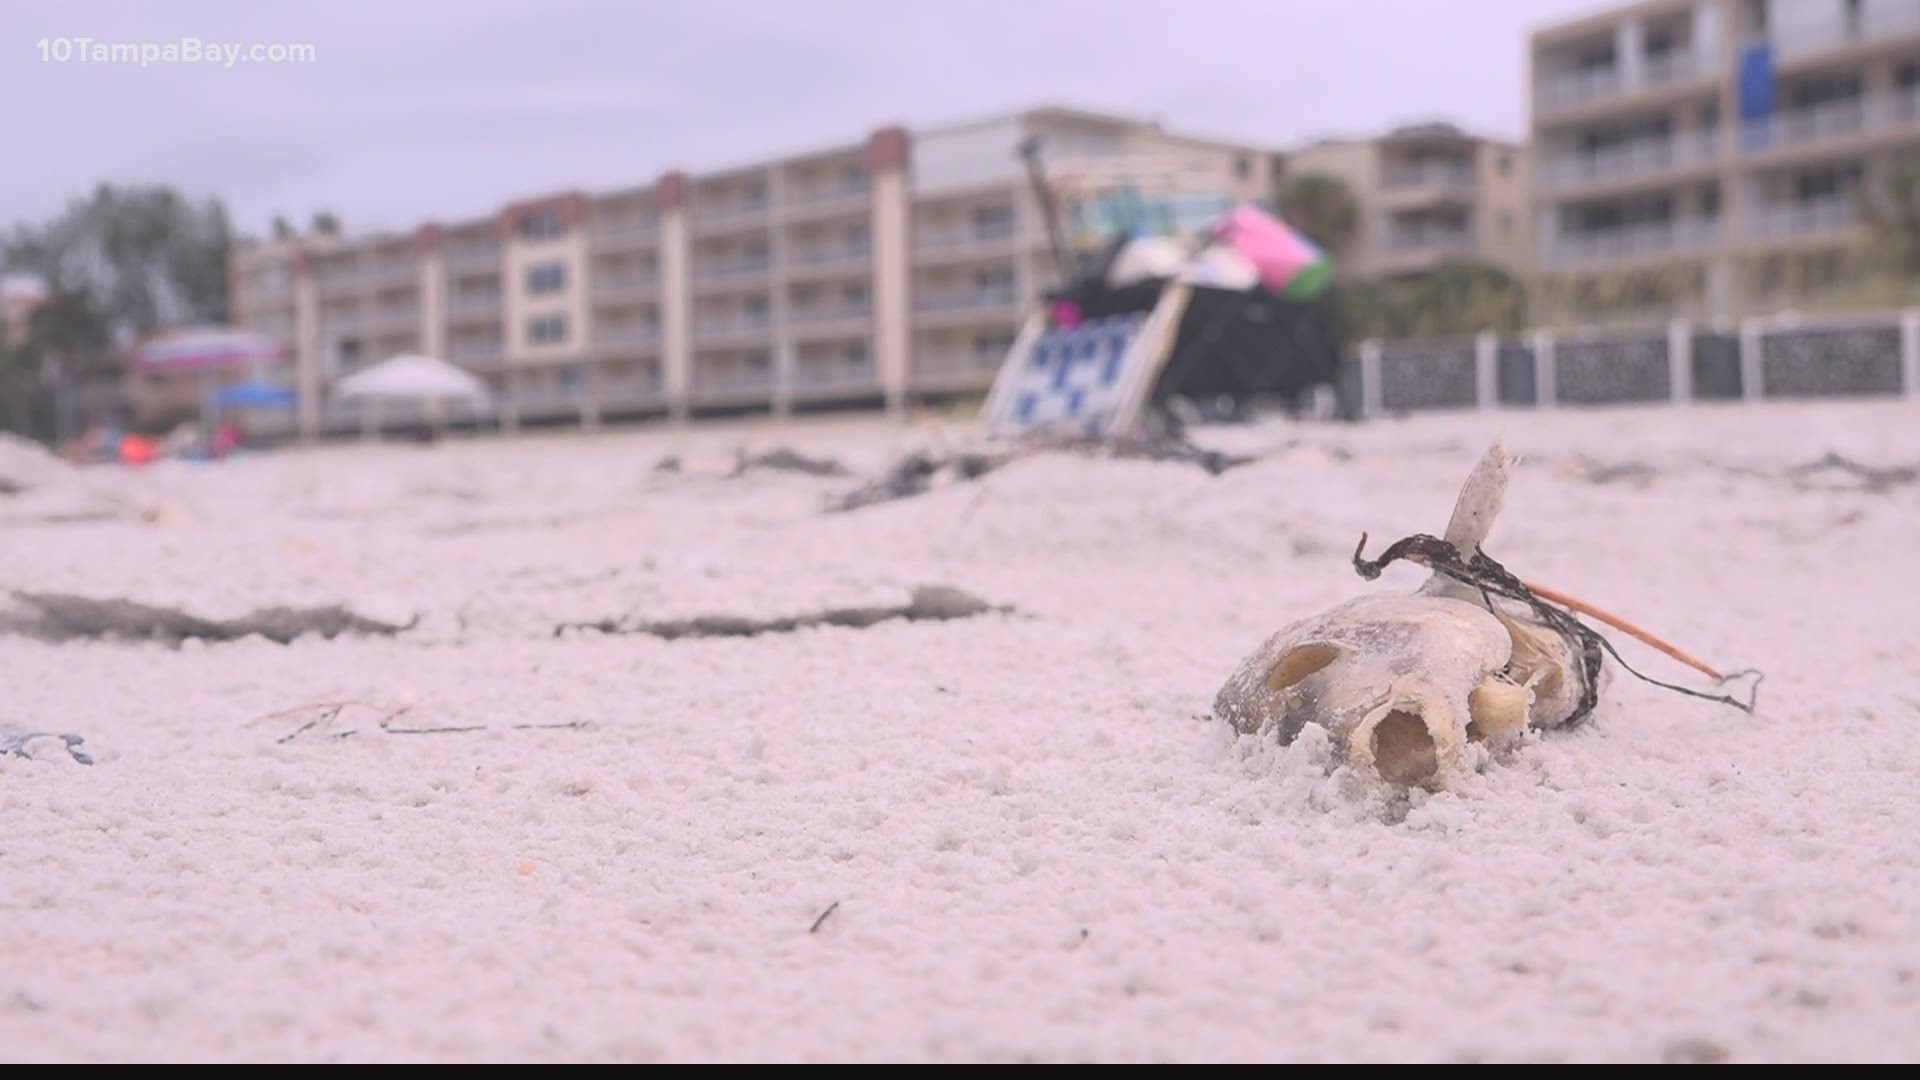 FWC Red tide increases off Pinellas County coastline